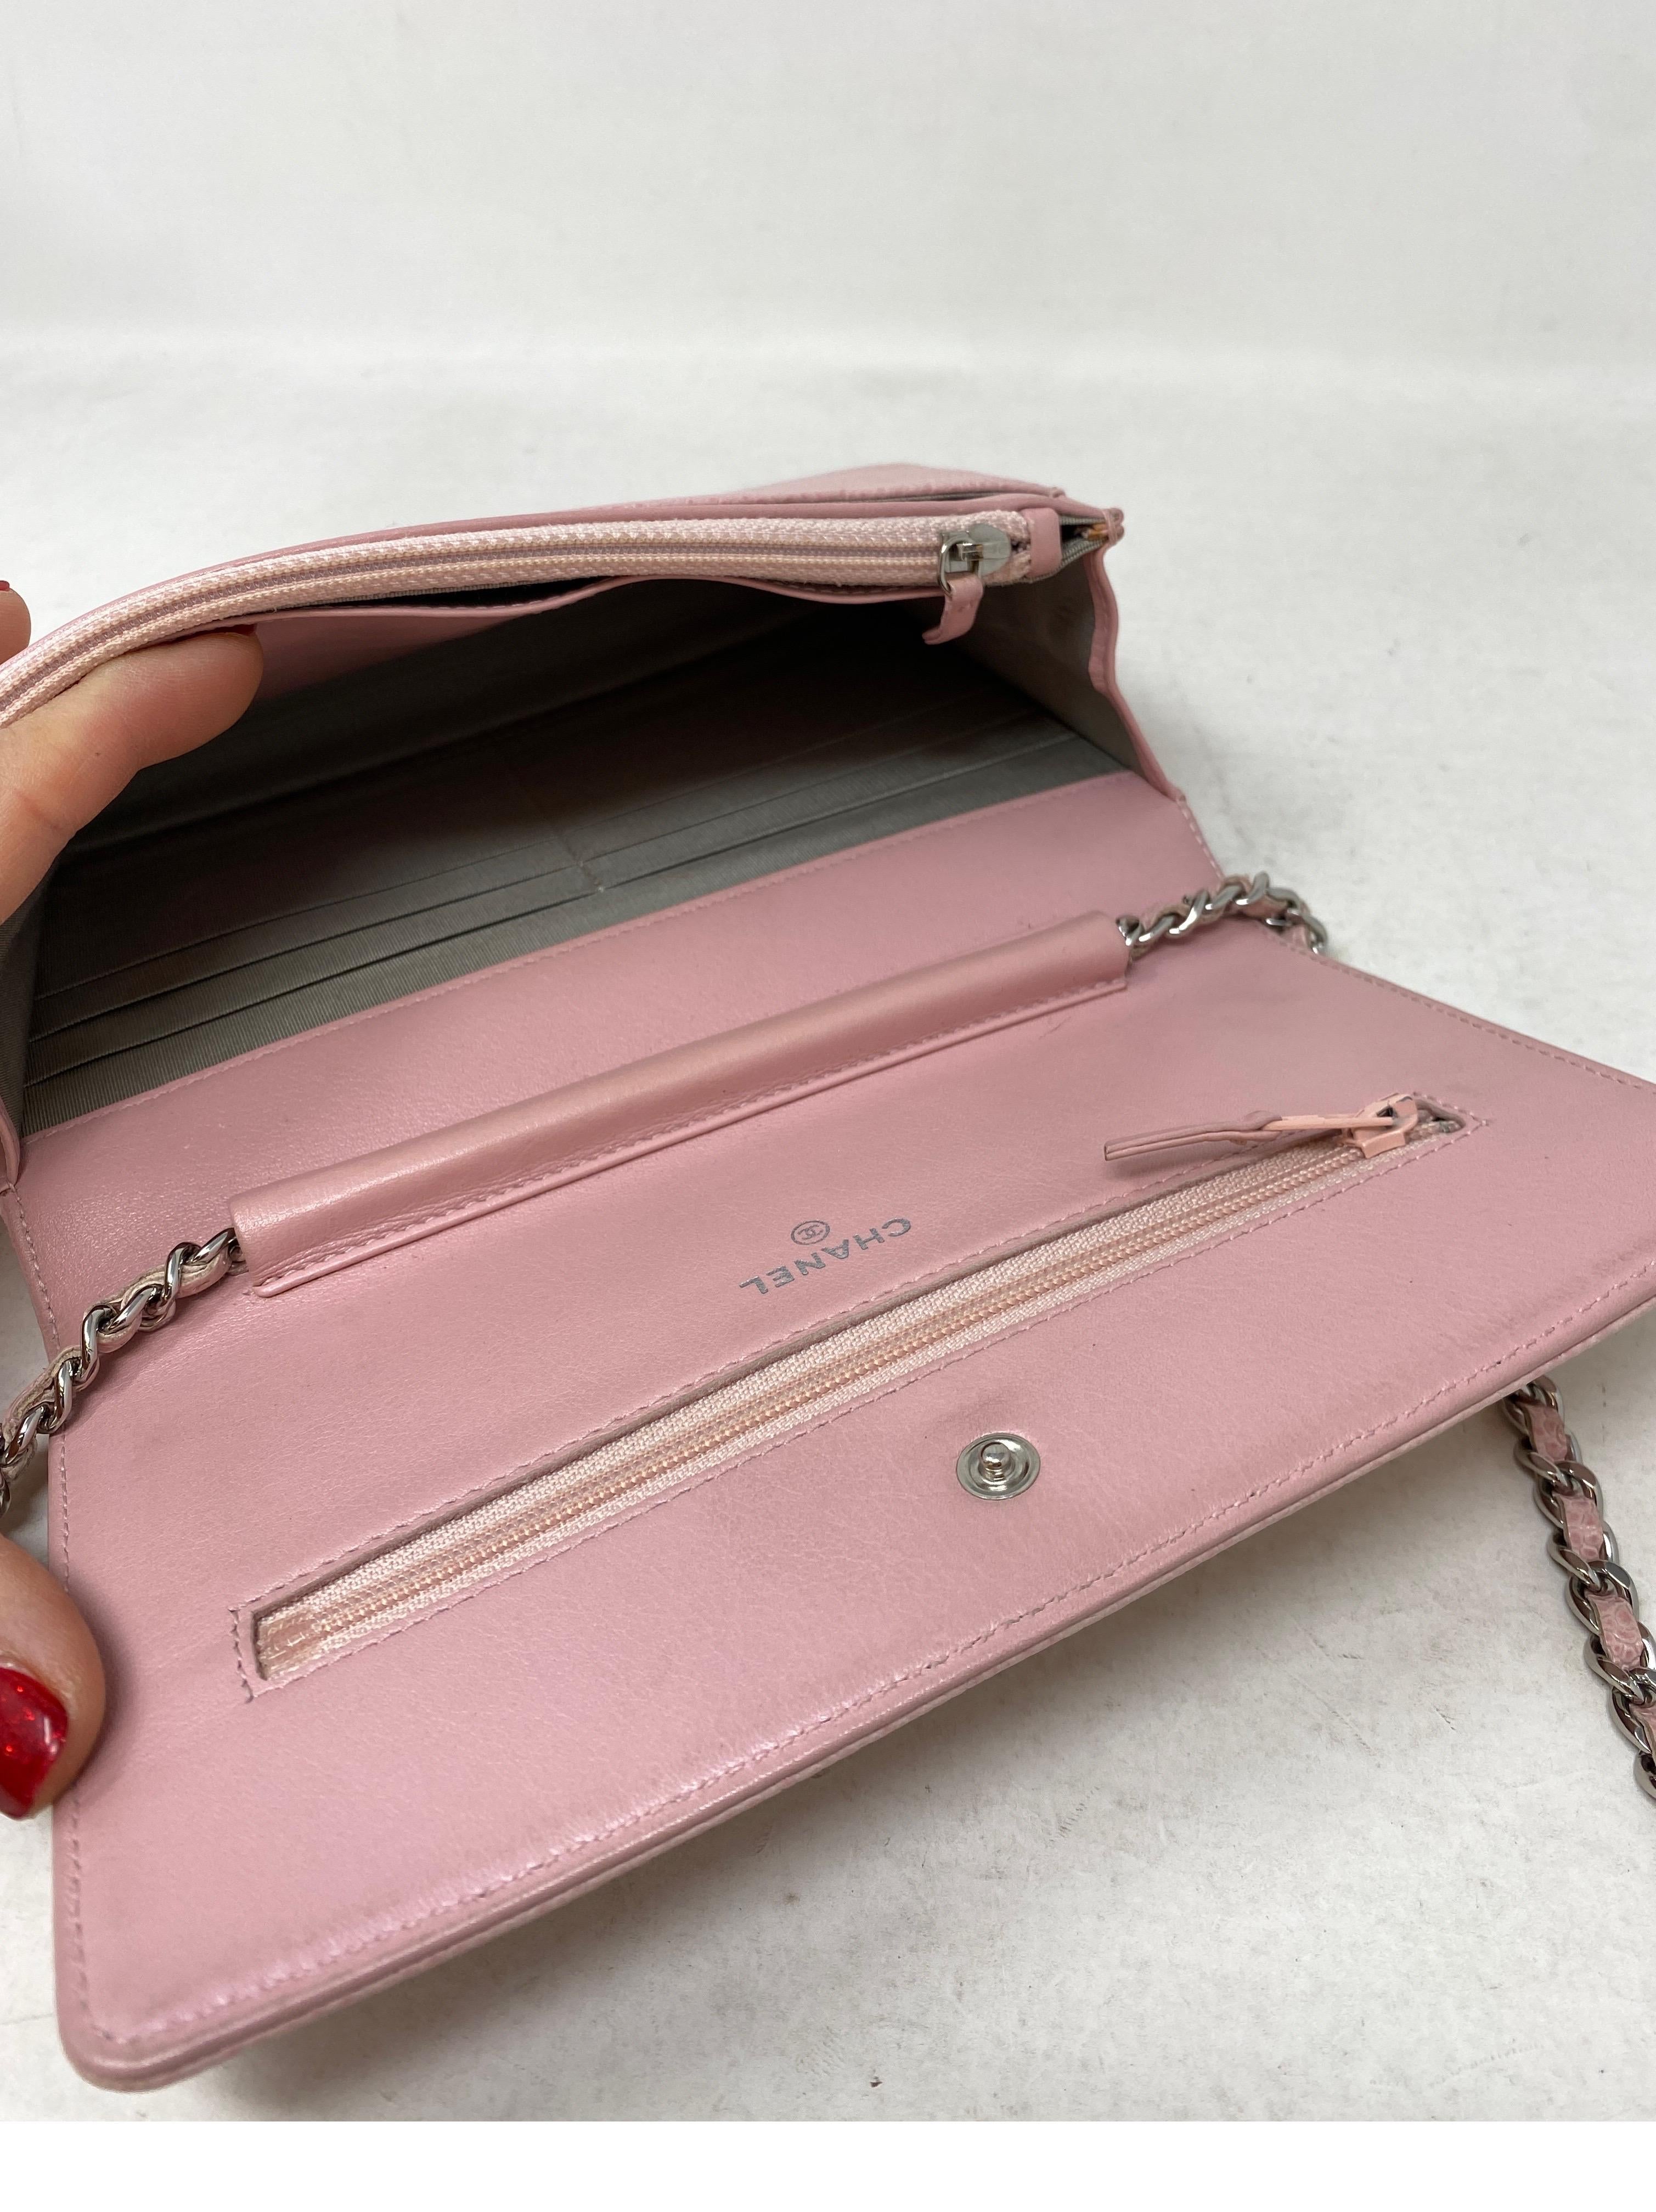 Chanel Light Pink Wallet On A Chain Bag  9